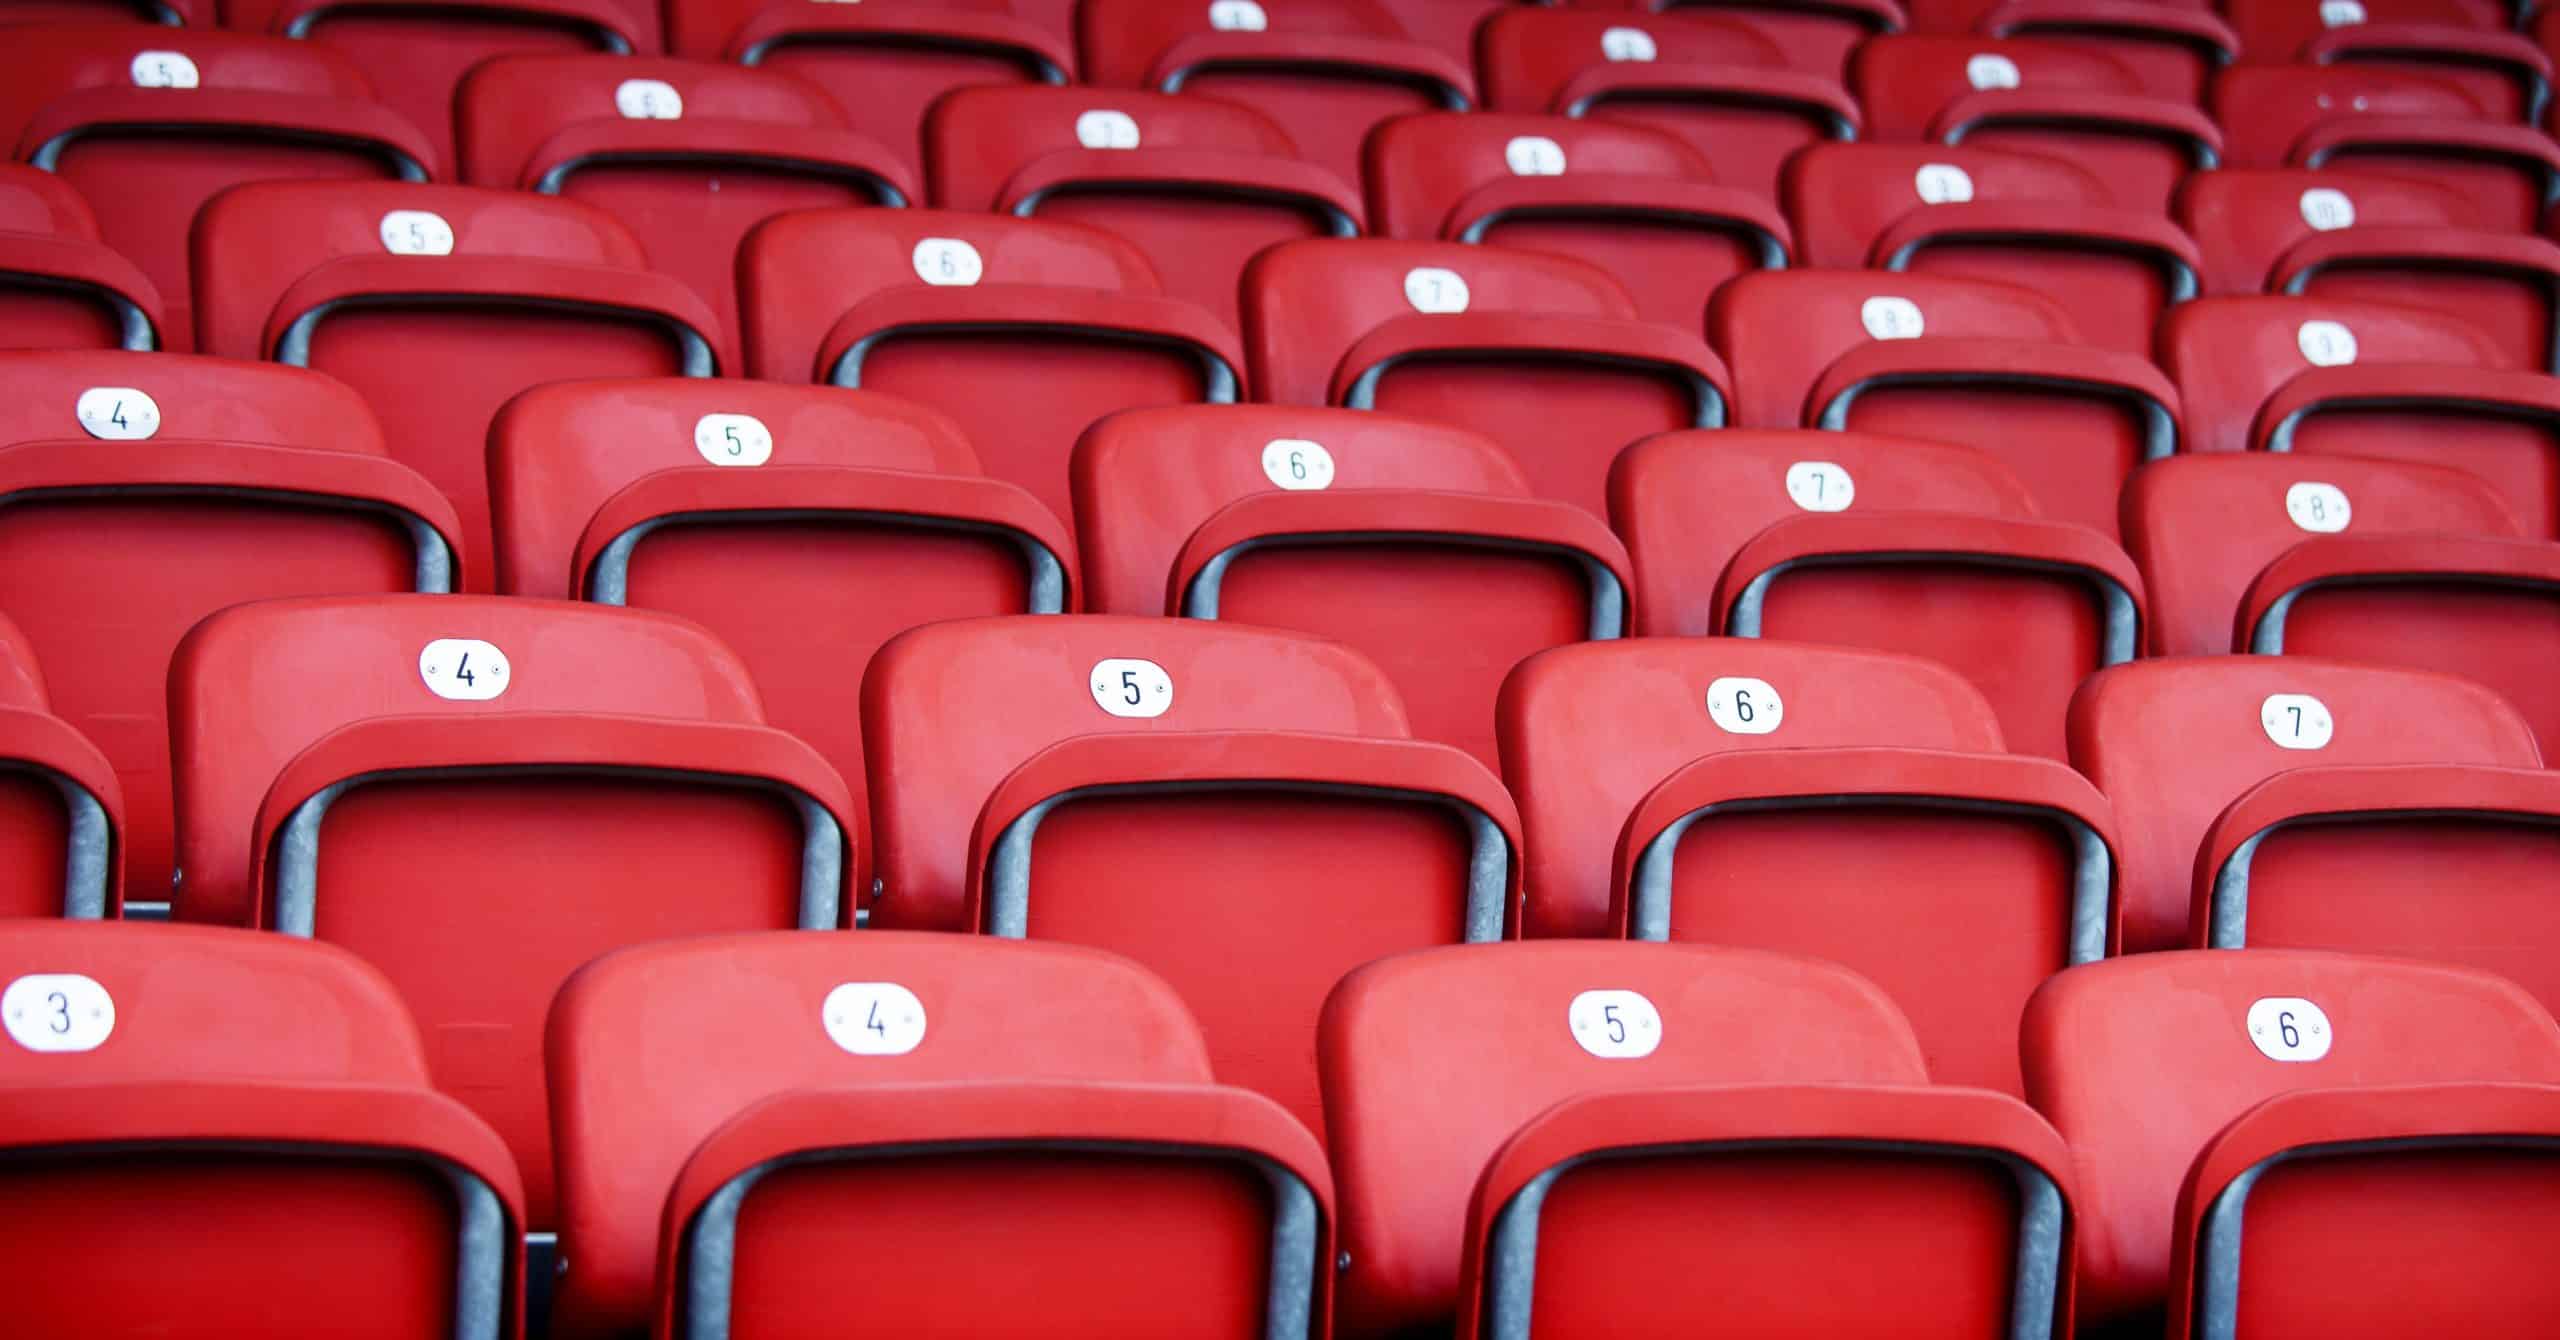 a photo of several rows of empty red seats at a stadium venue